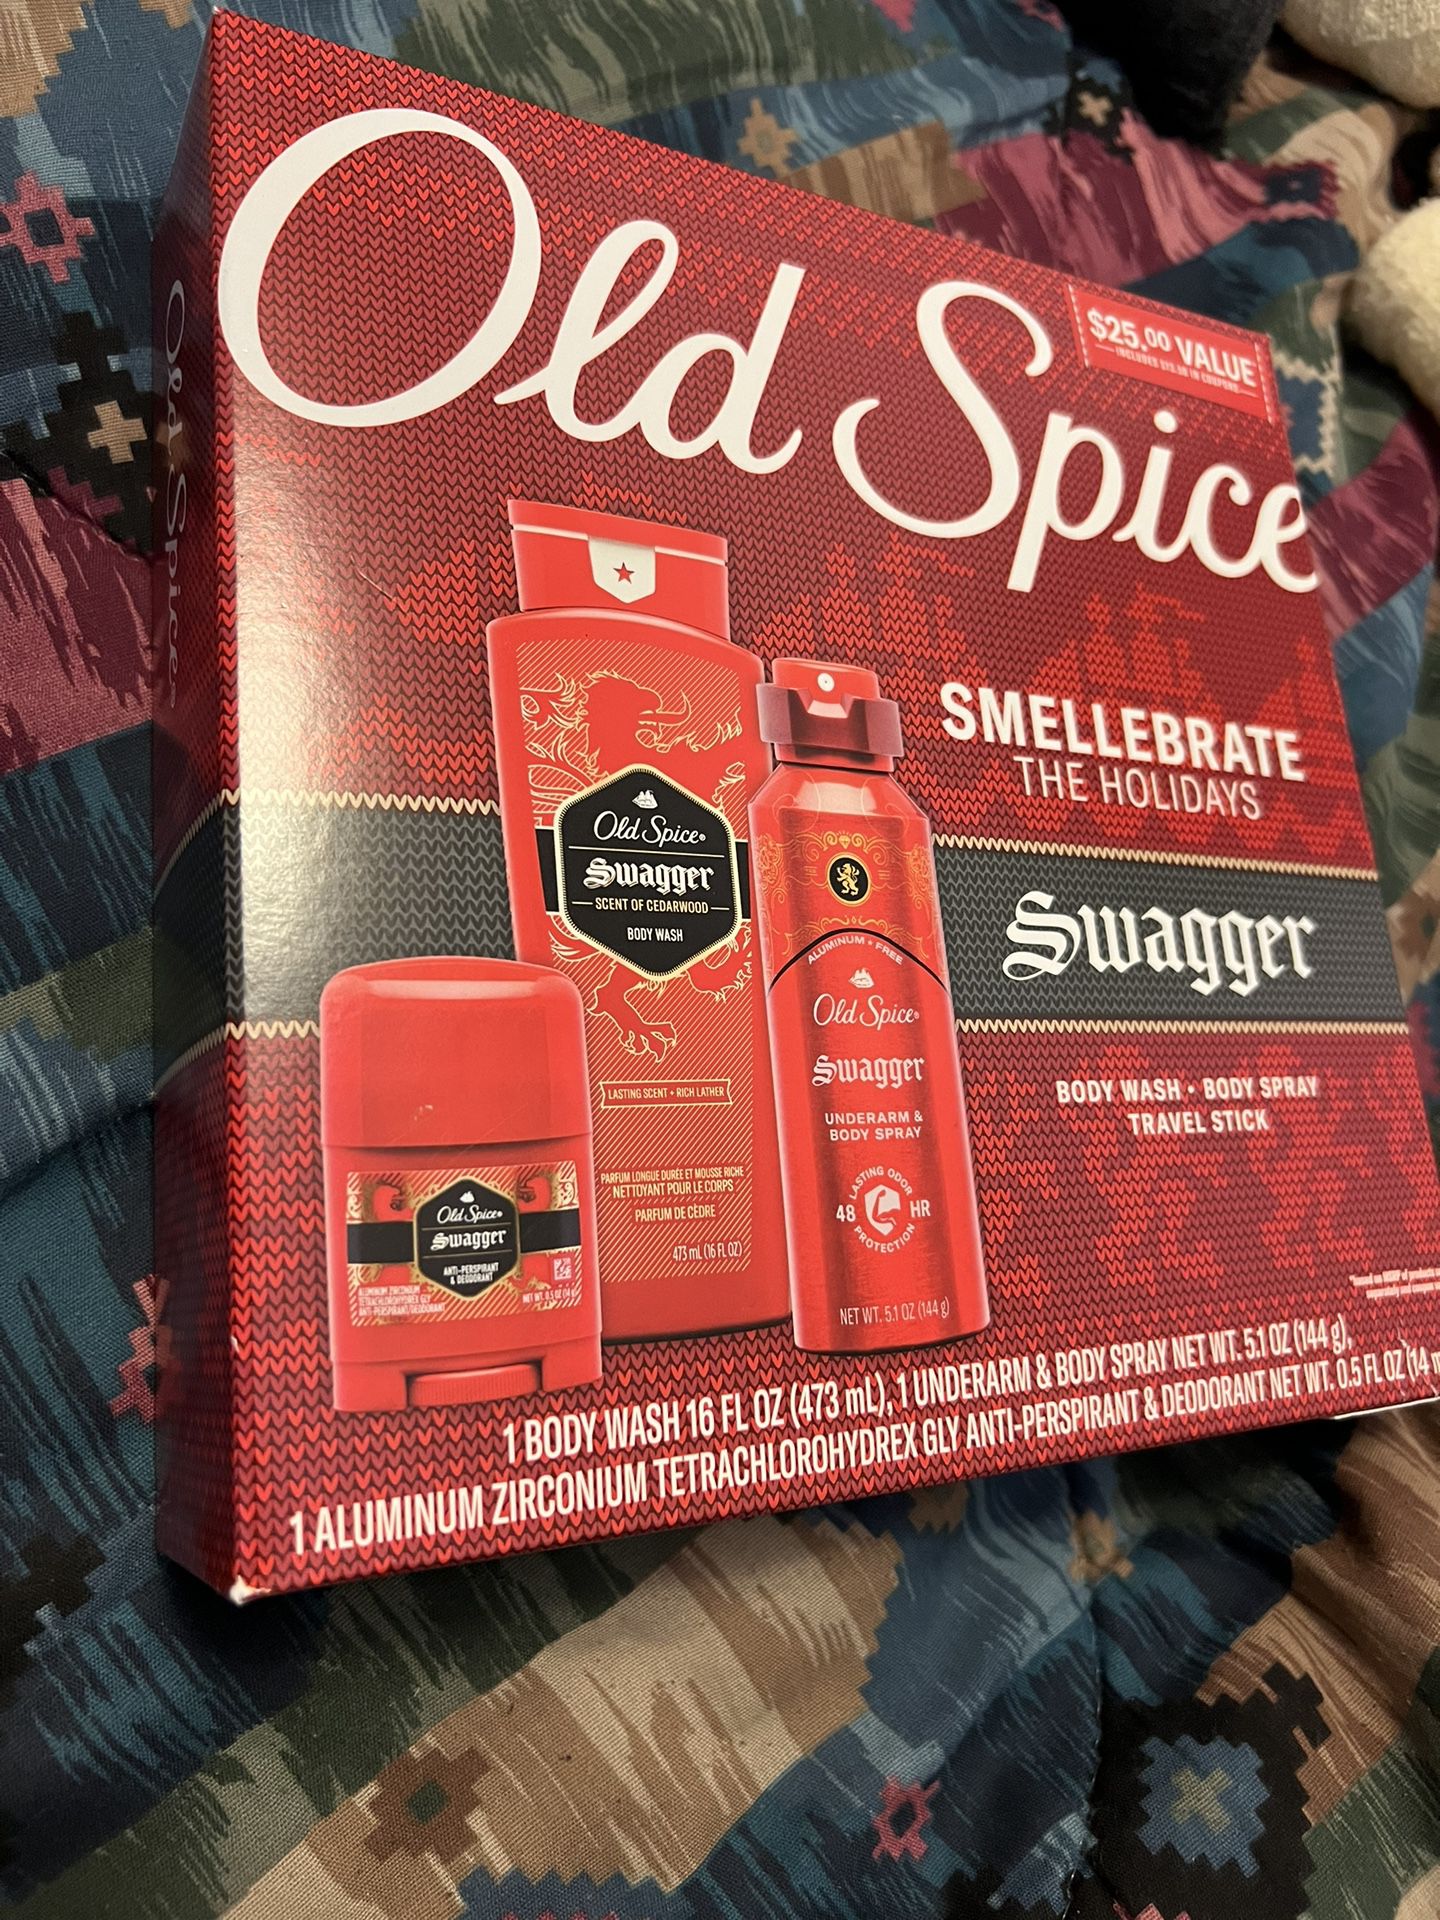 Old Spice Hollidays Swagger Gift Box 